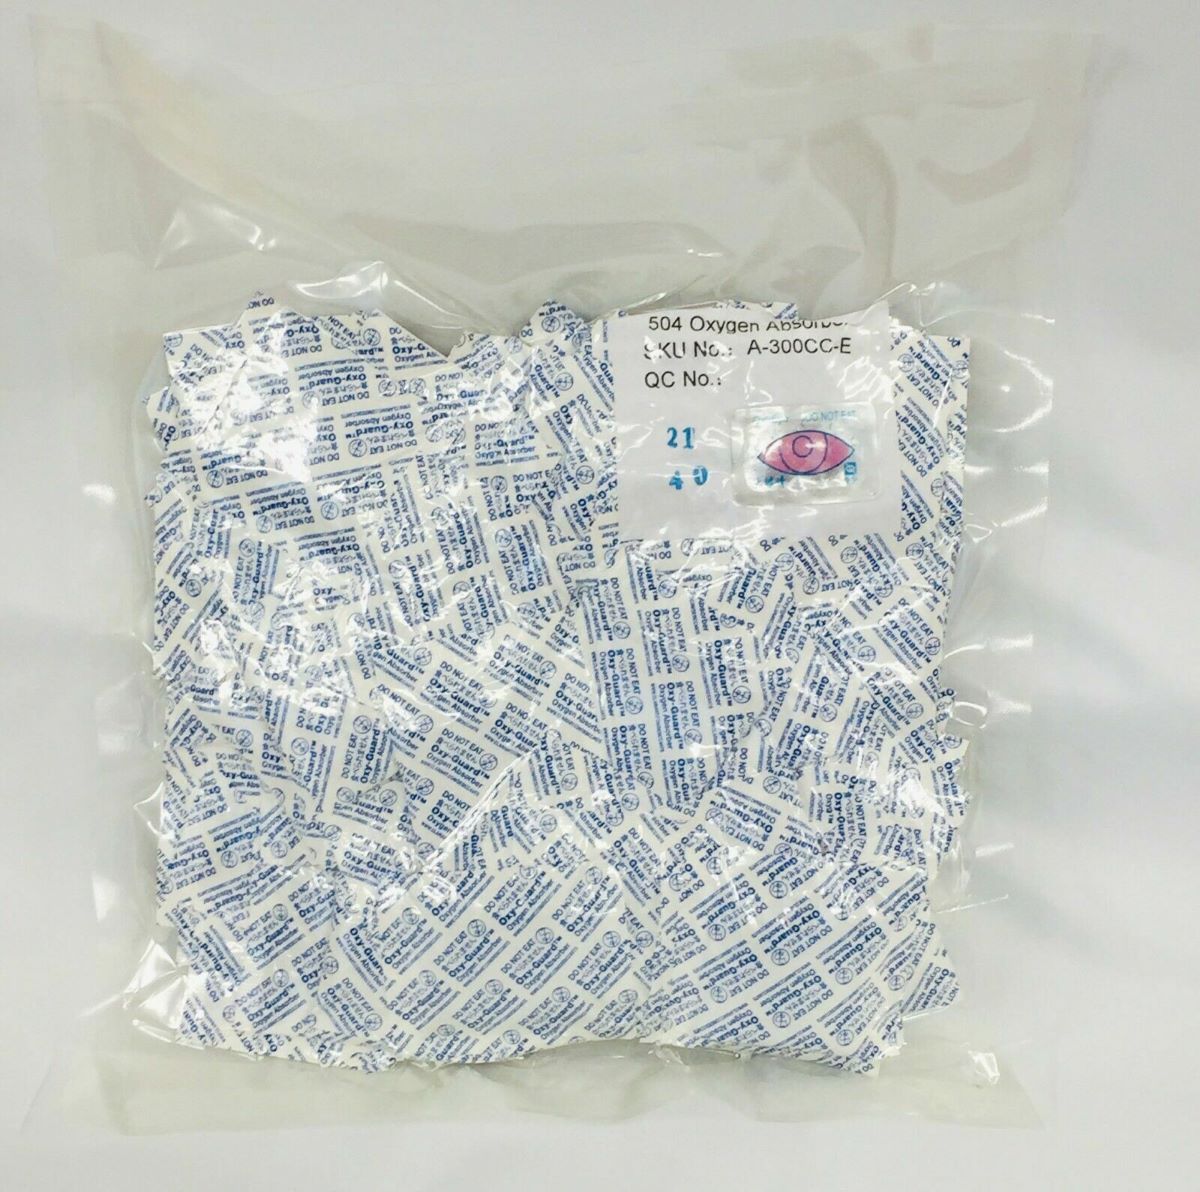 How To Store Oxygen Absorbers